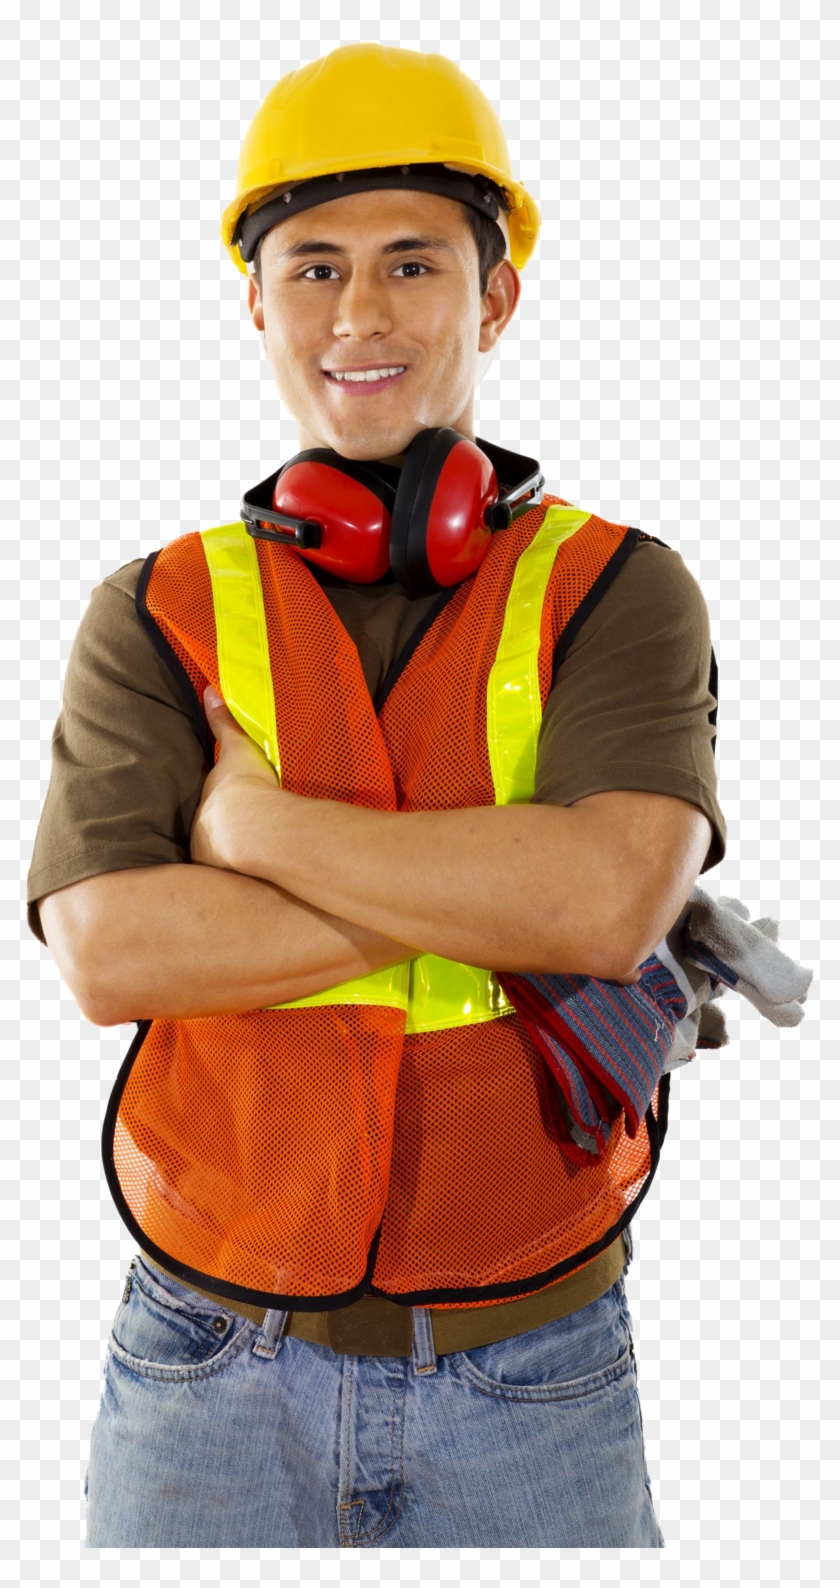 Bookmark The Permalink - Construction Worker Png Clipart